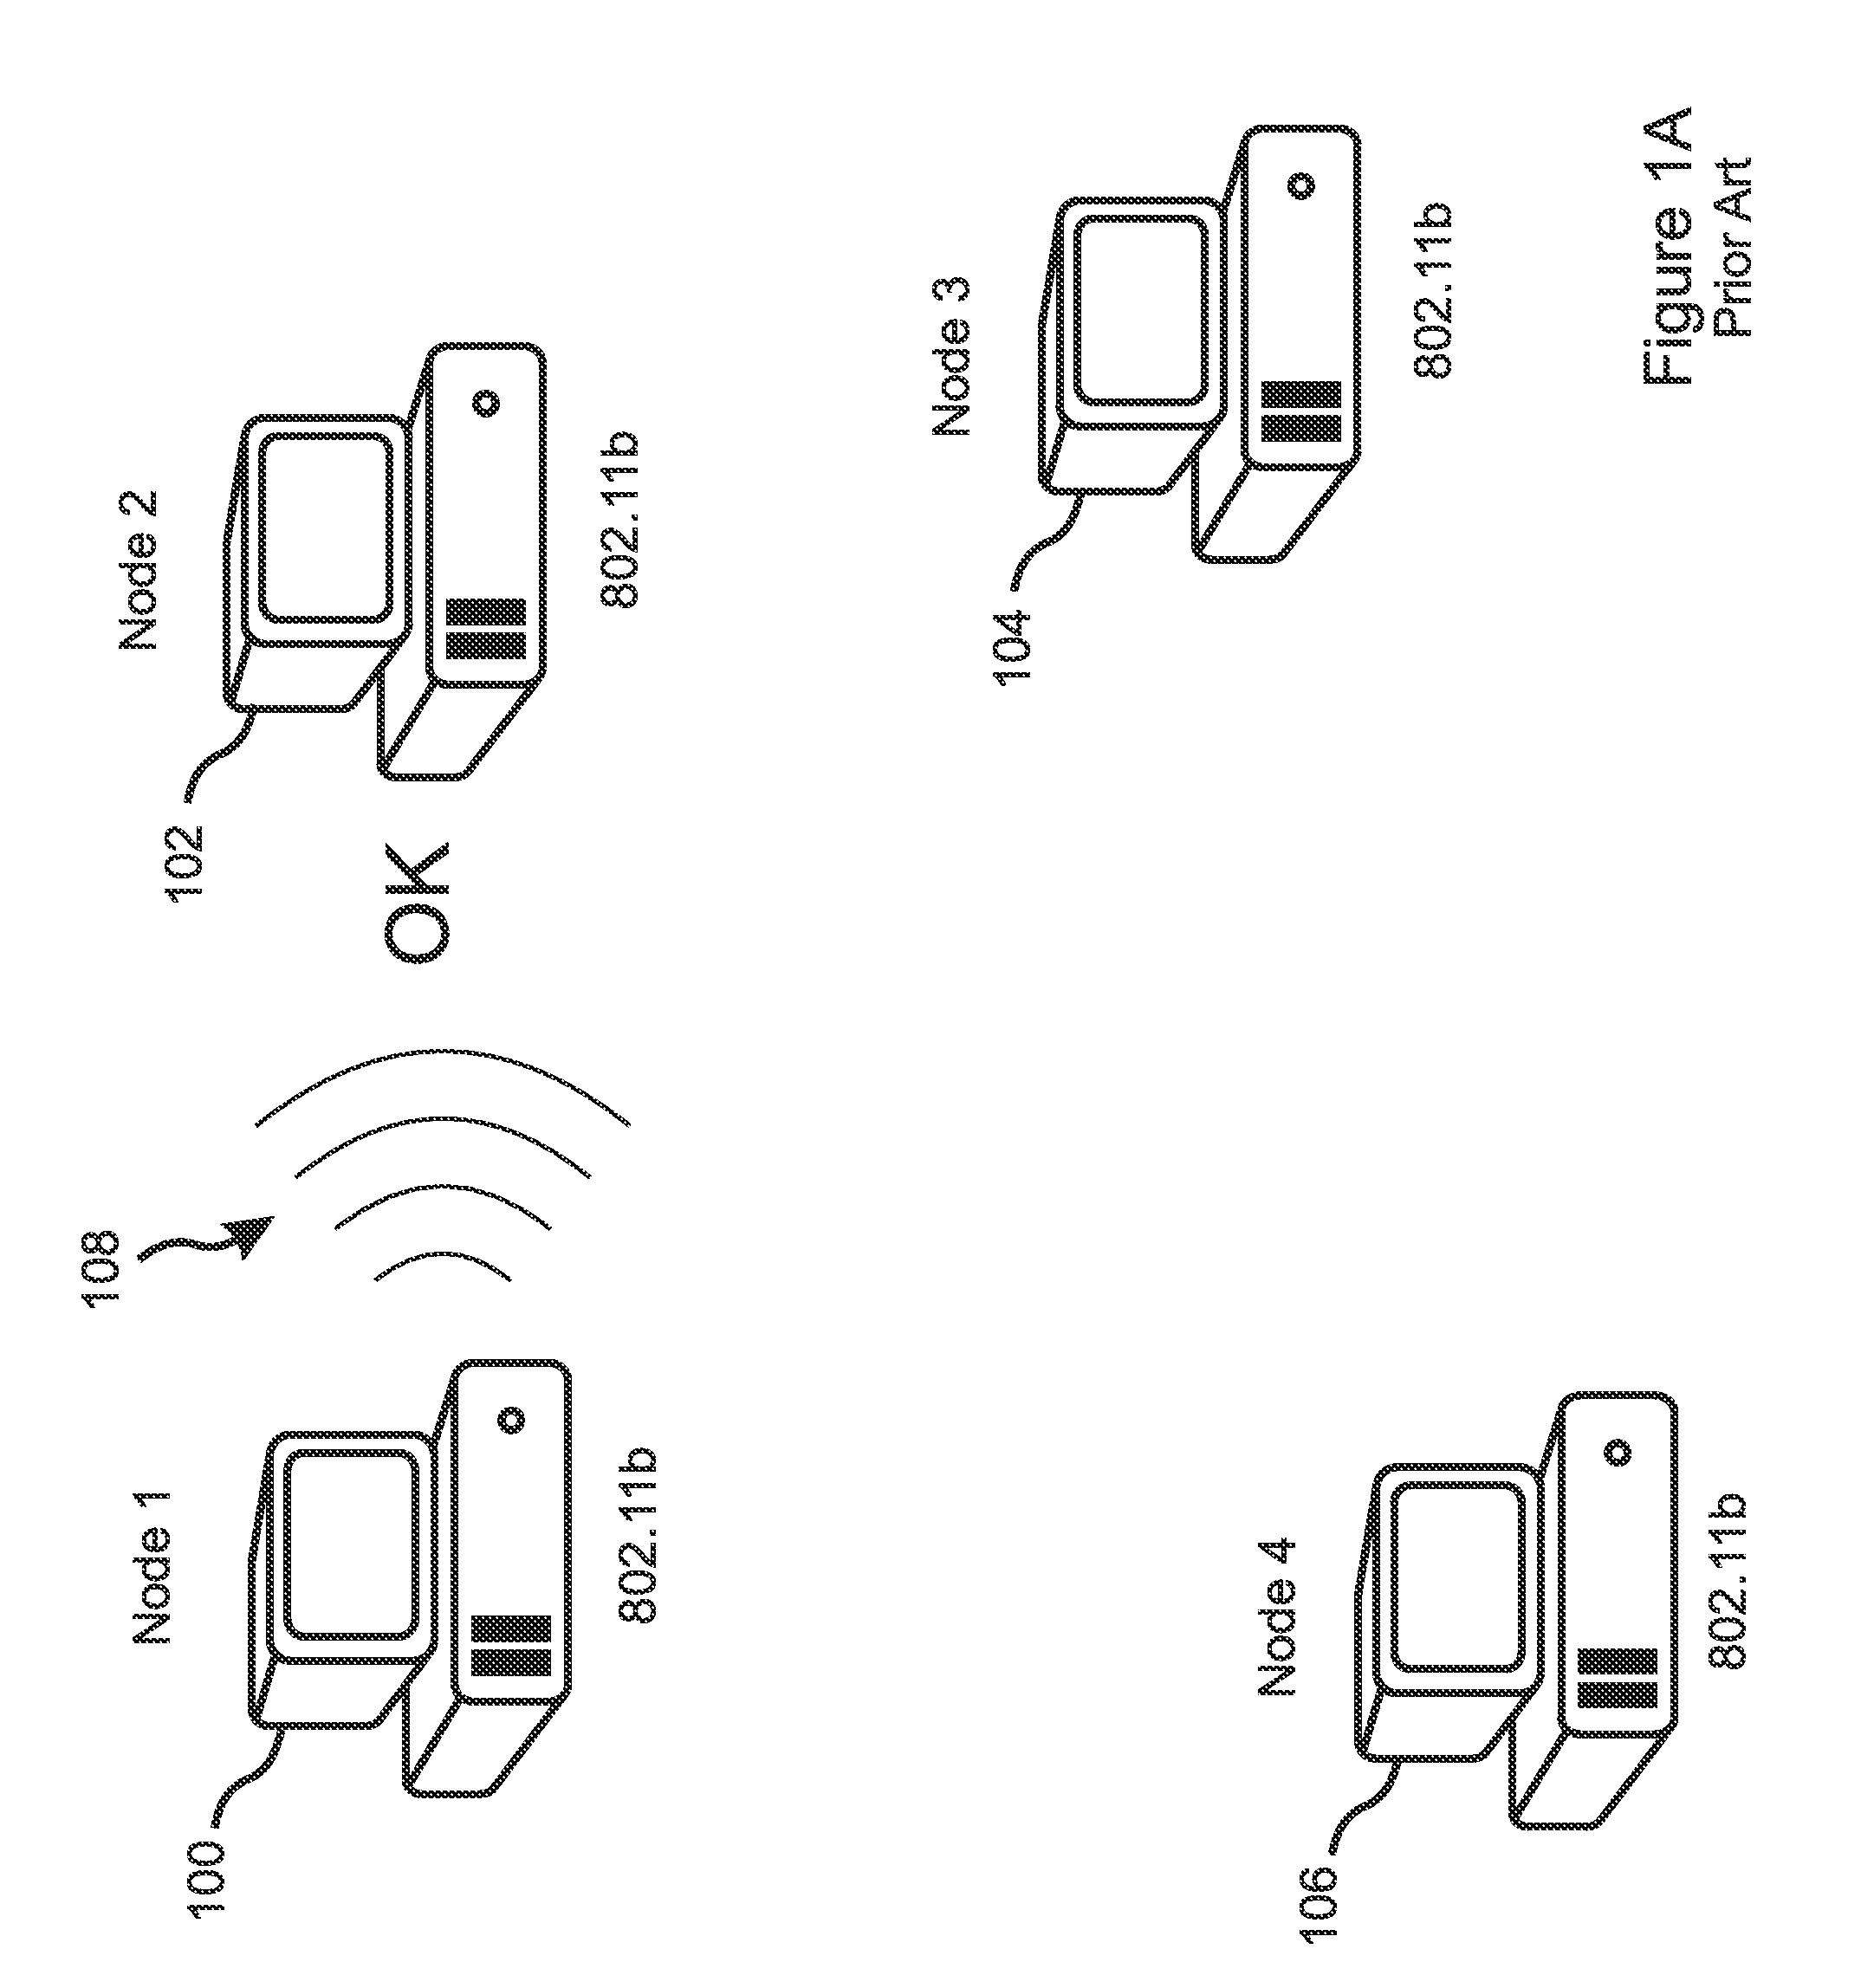 Media access control protocol for multiuser detection enabled ad-hoc wireless communications